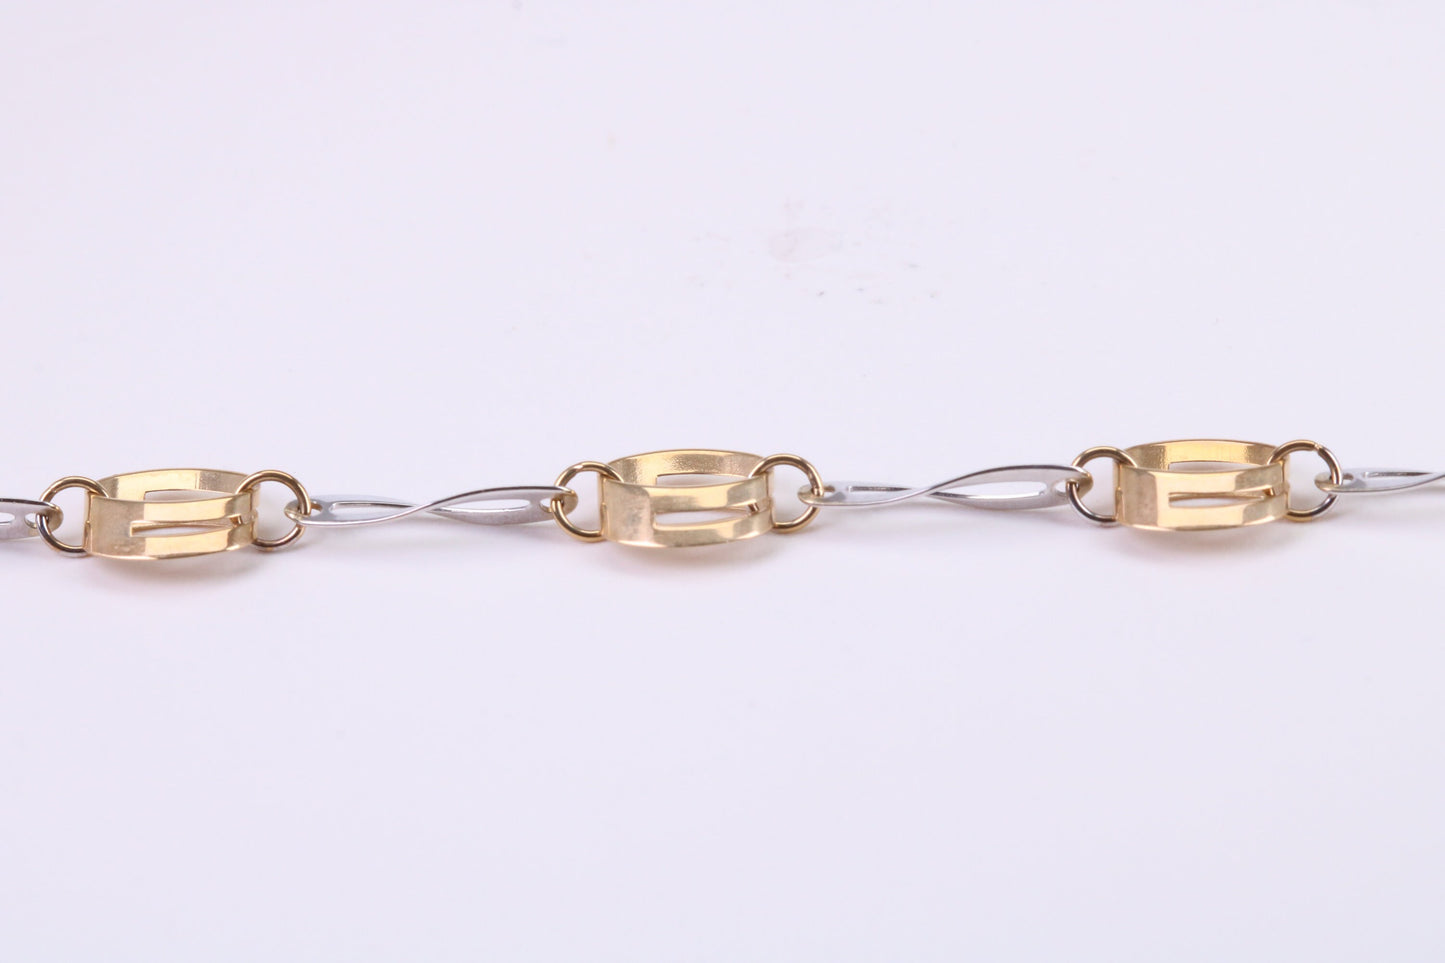 Round and Oval Open Link Bracelet, Made From Solid Yellow Gold, British Hallmarked, Luxury Gift Boxed